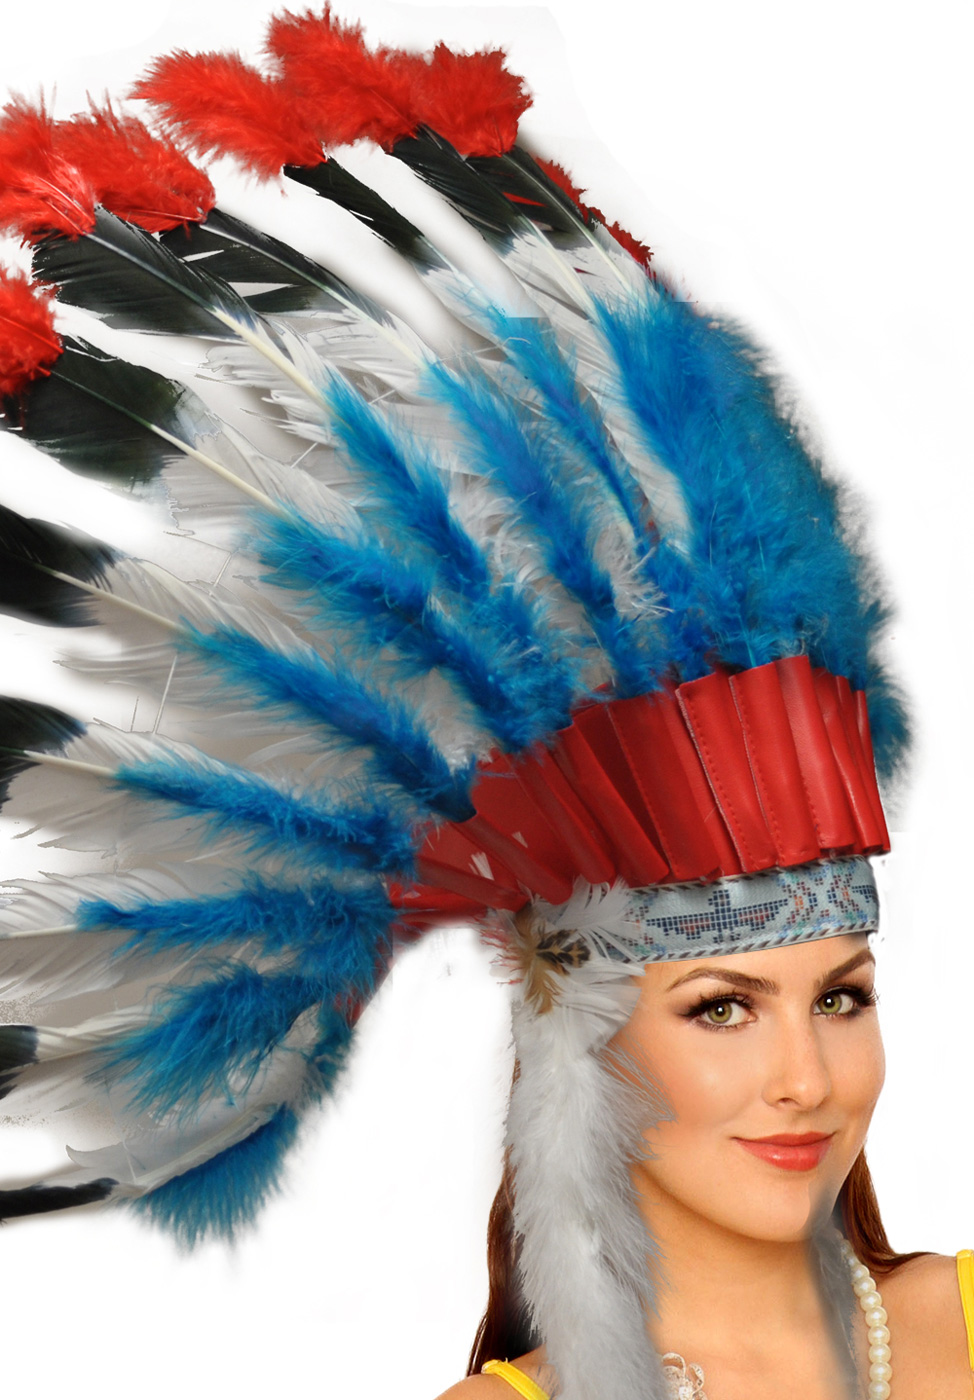 Native Ameican Indian Chief Feather Headdress Head Dress Costume Unisex Red Blue Ebay